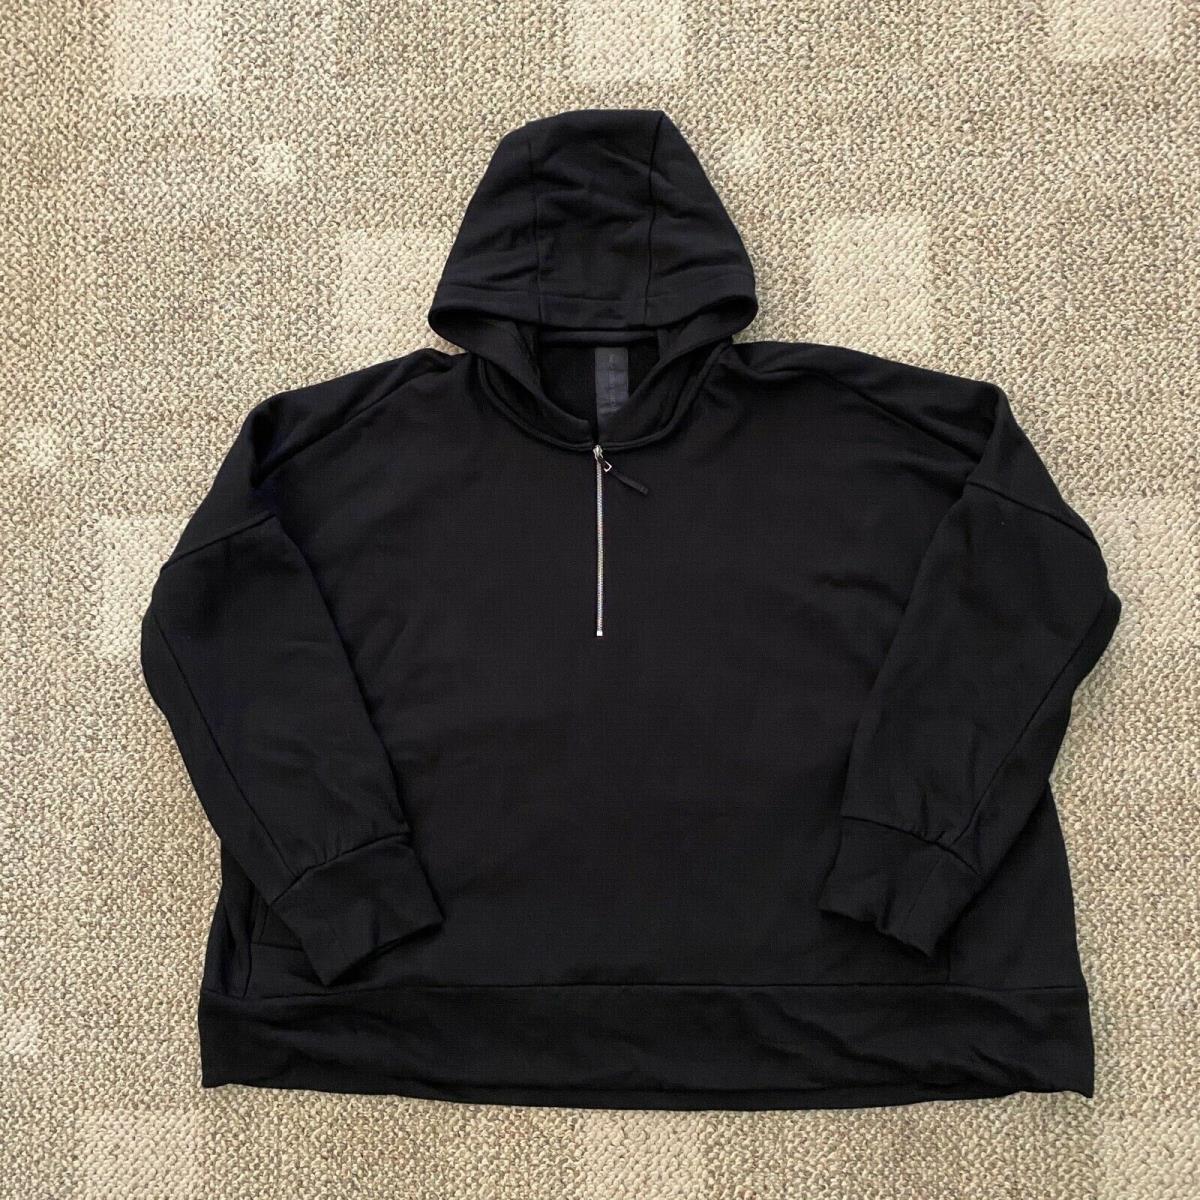 Nike Esc Every Stitch Considered Women`s Med M 1/4 Zip Hoodie Black CW3739